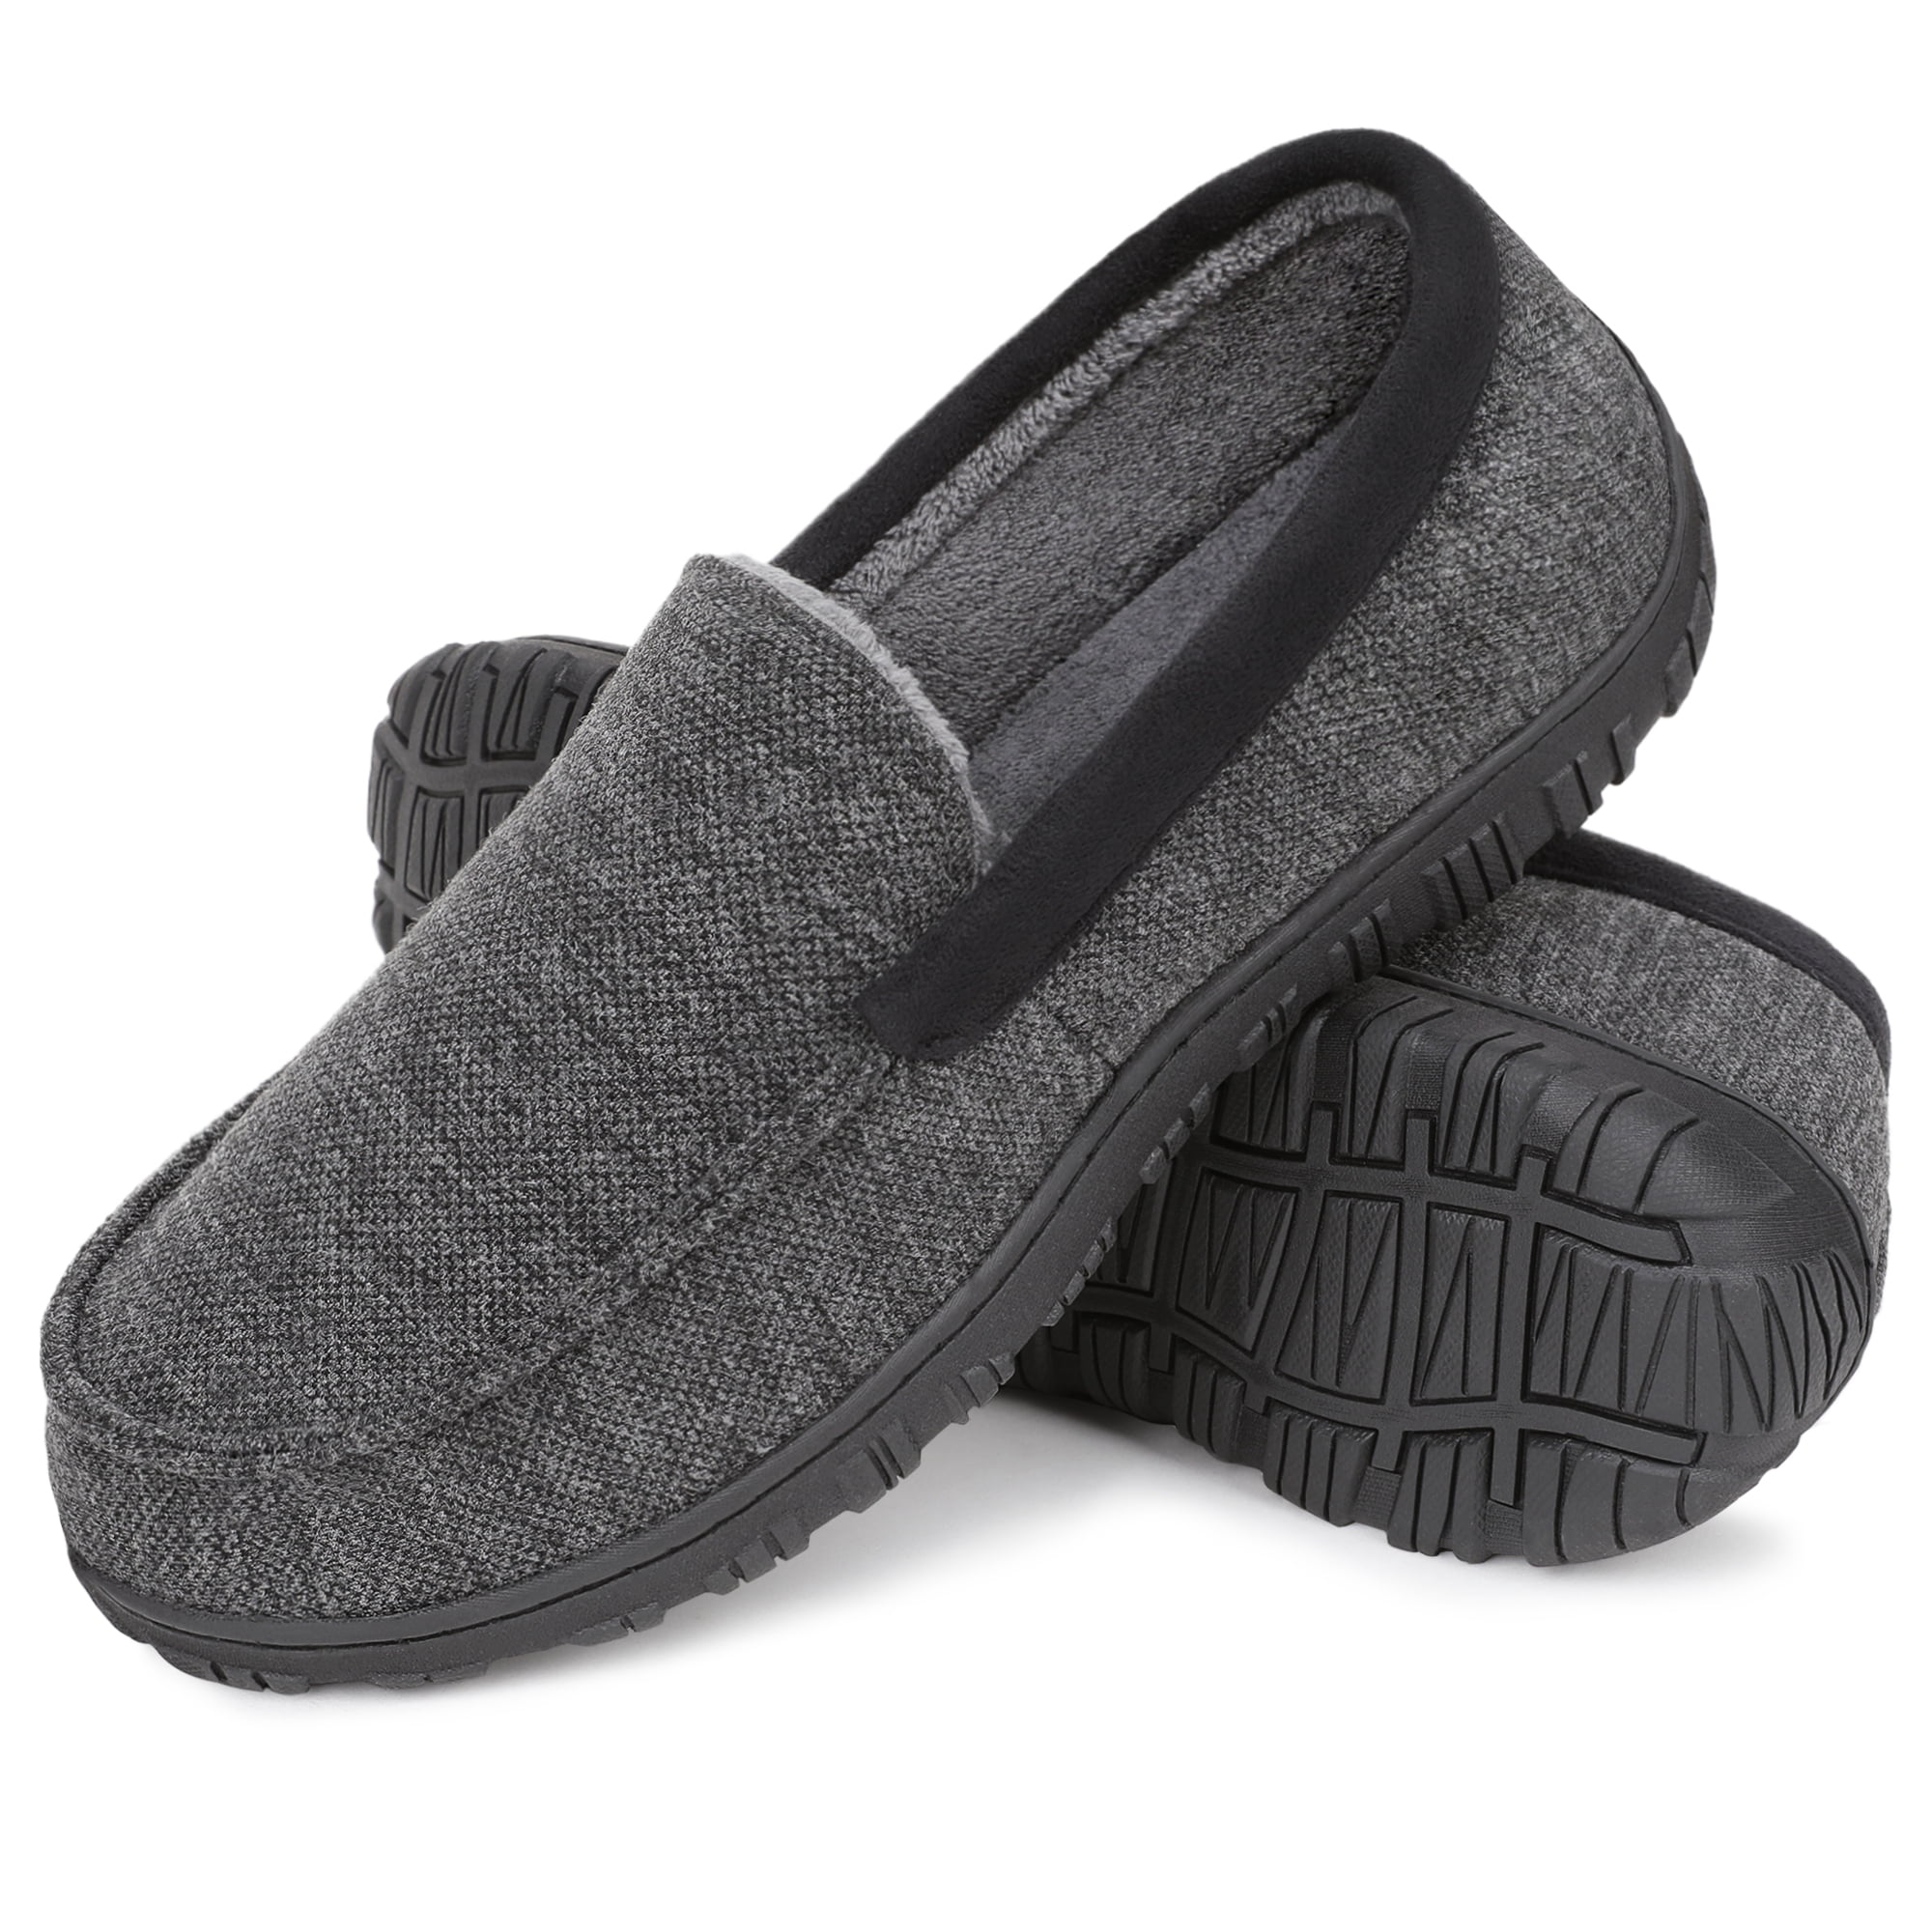 HOMEHOT Mens Slippers Moccasin Memory Foam House Shoes Adult Size 11 ...